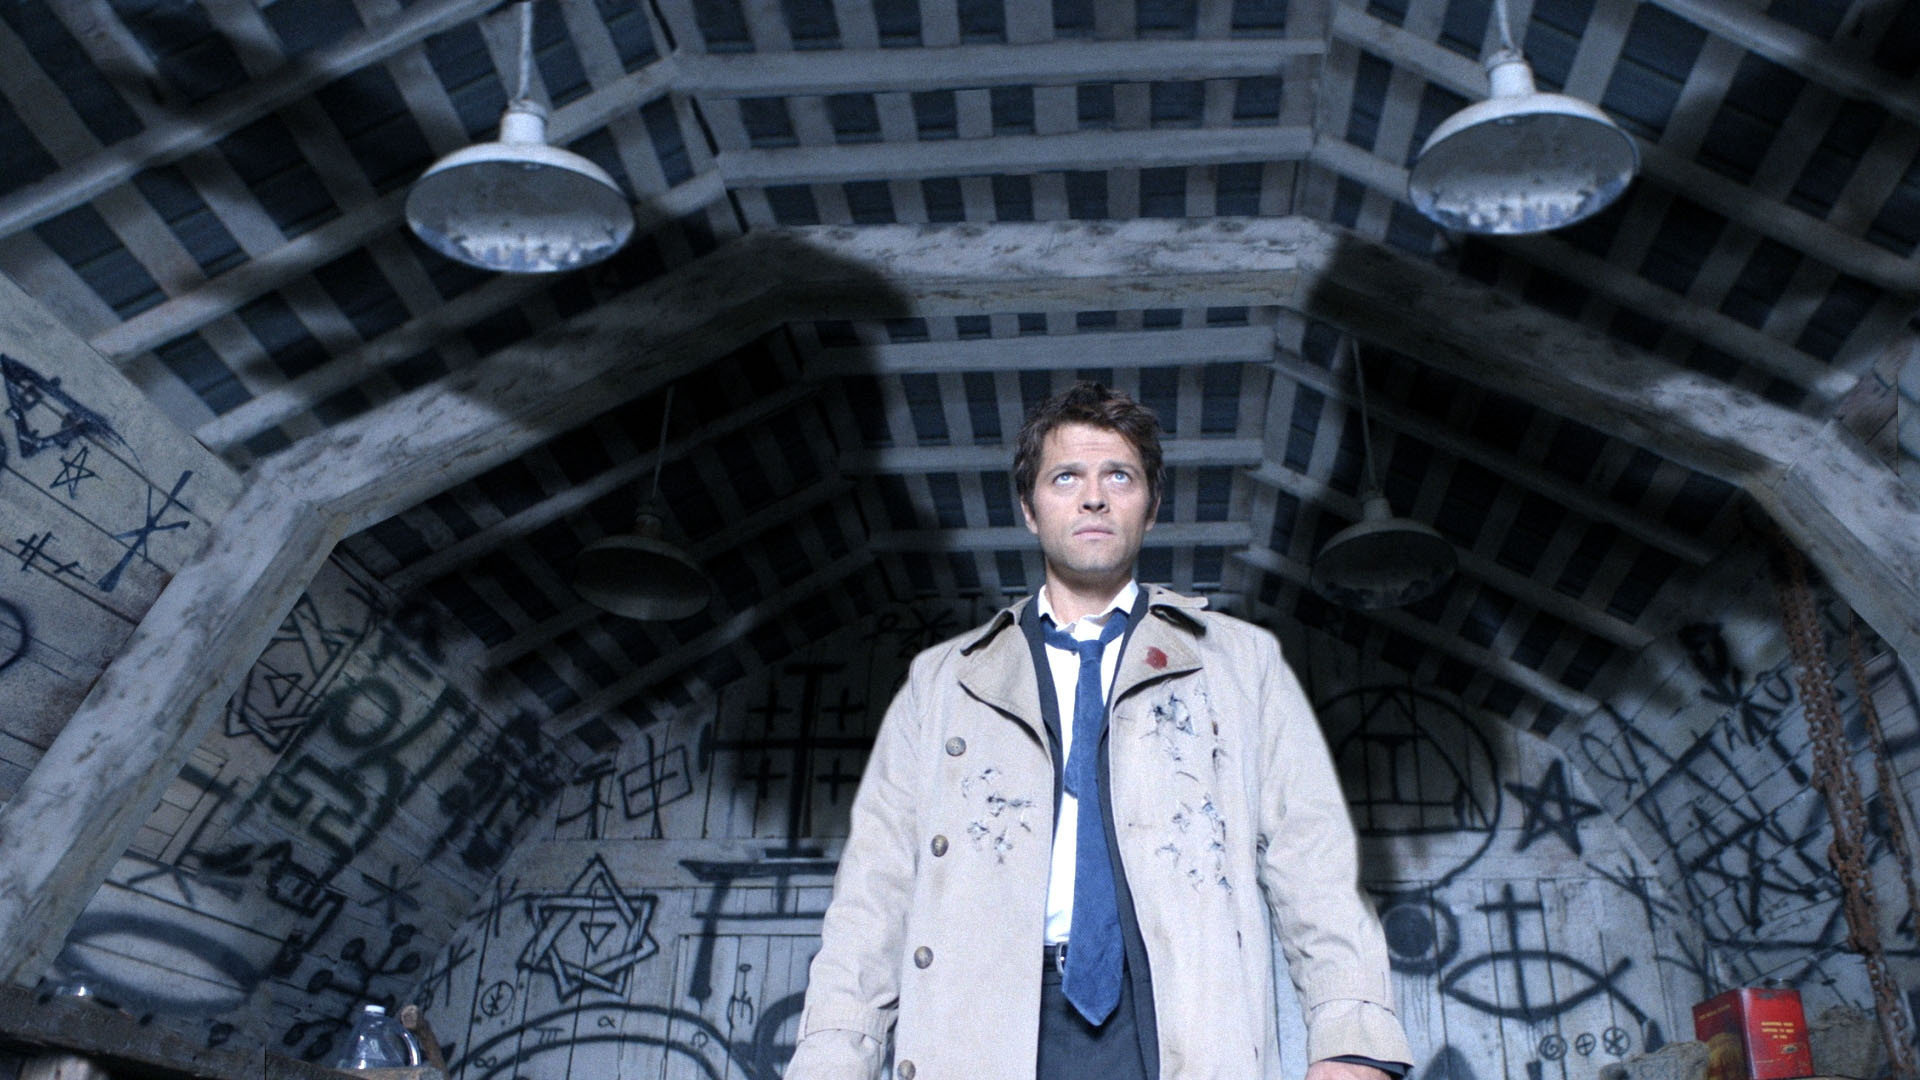 Awesome Supernatural free wallpaper ID:59701 for full hd 1920x1080 desktop